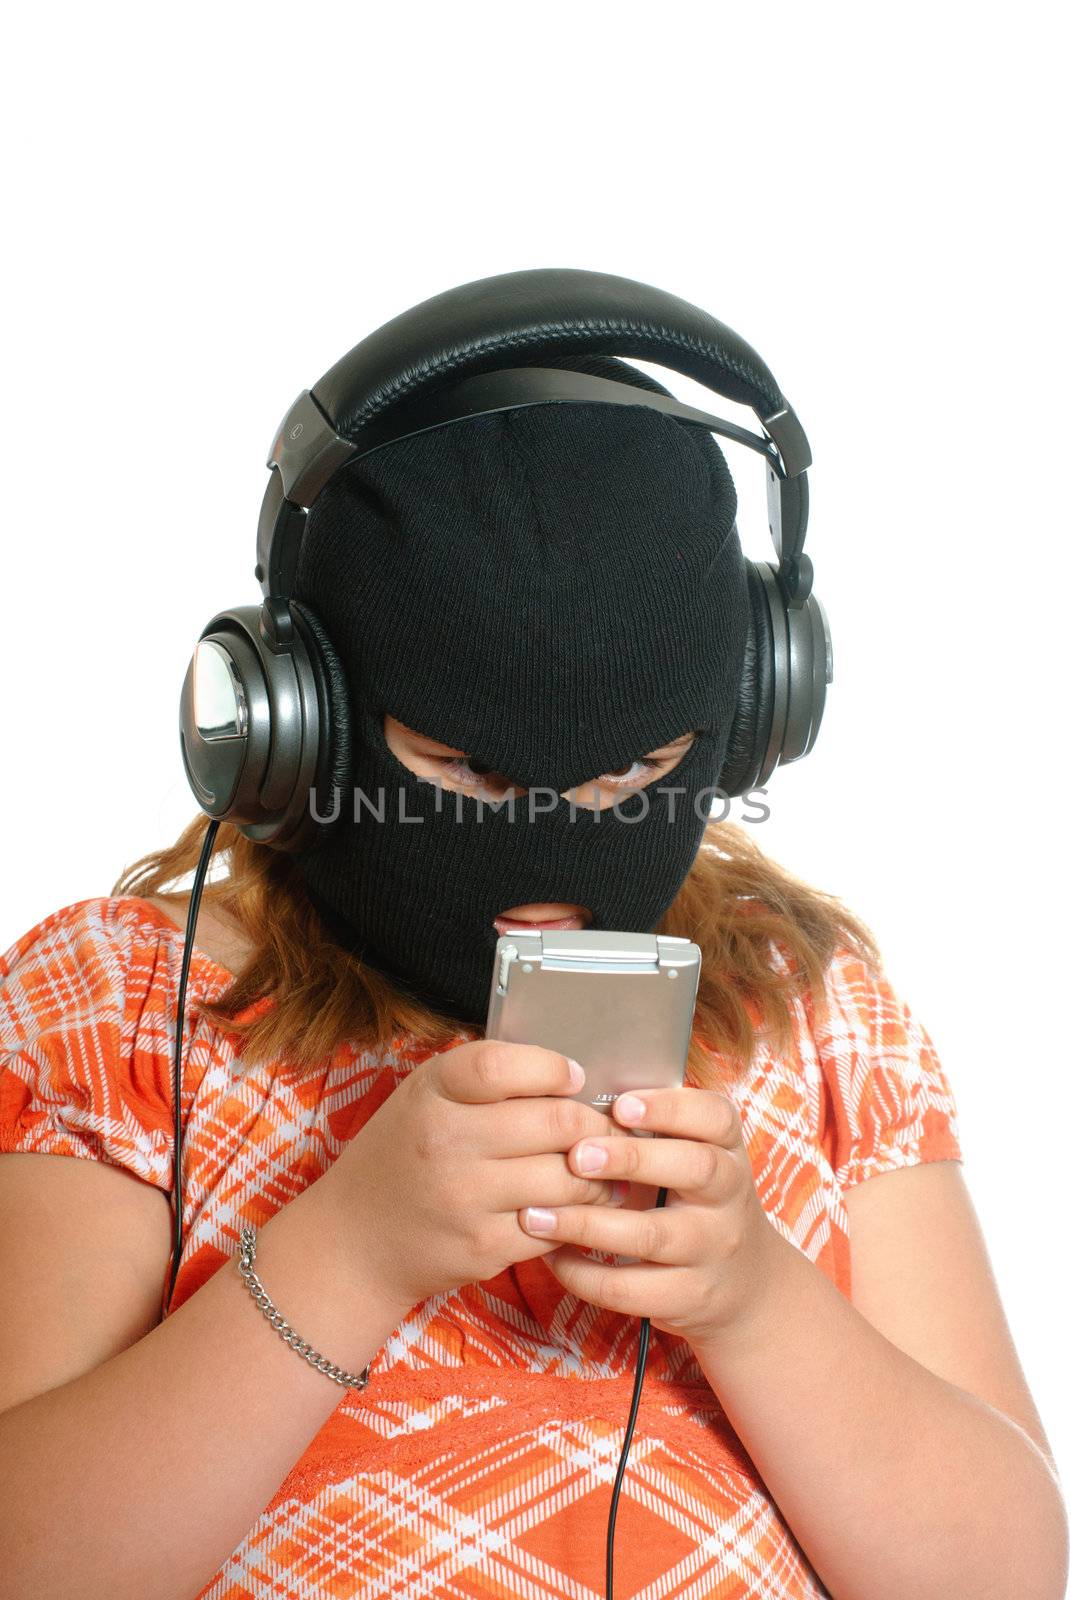 Concept image of a young girl listening to pirated or illegal music downloads on her mp3 player, isolated against a white background.